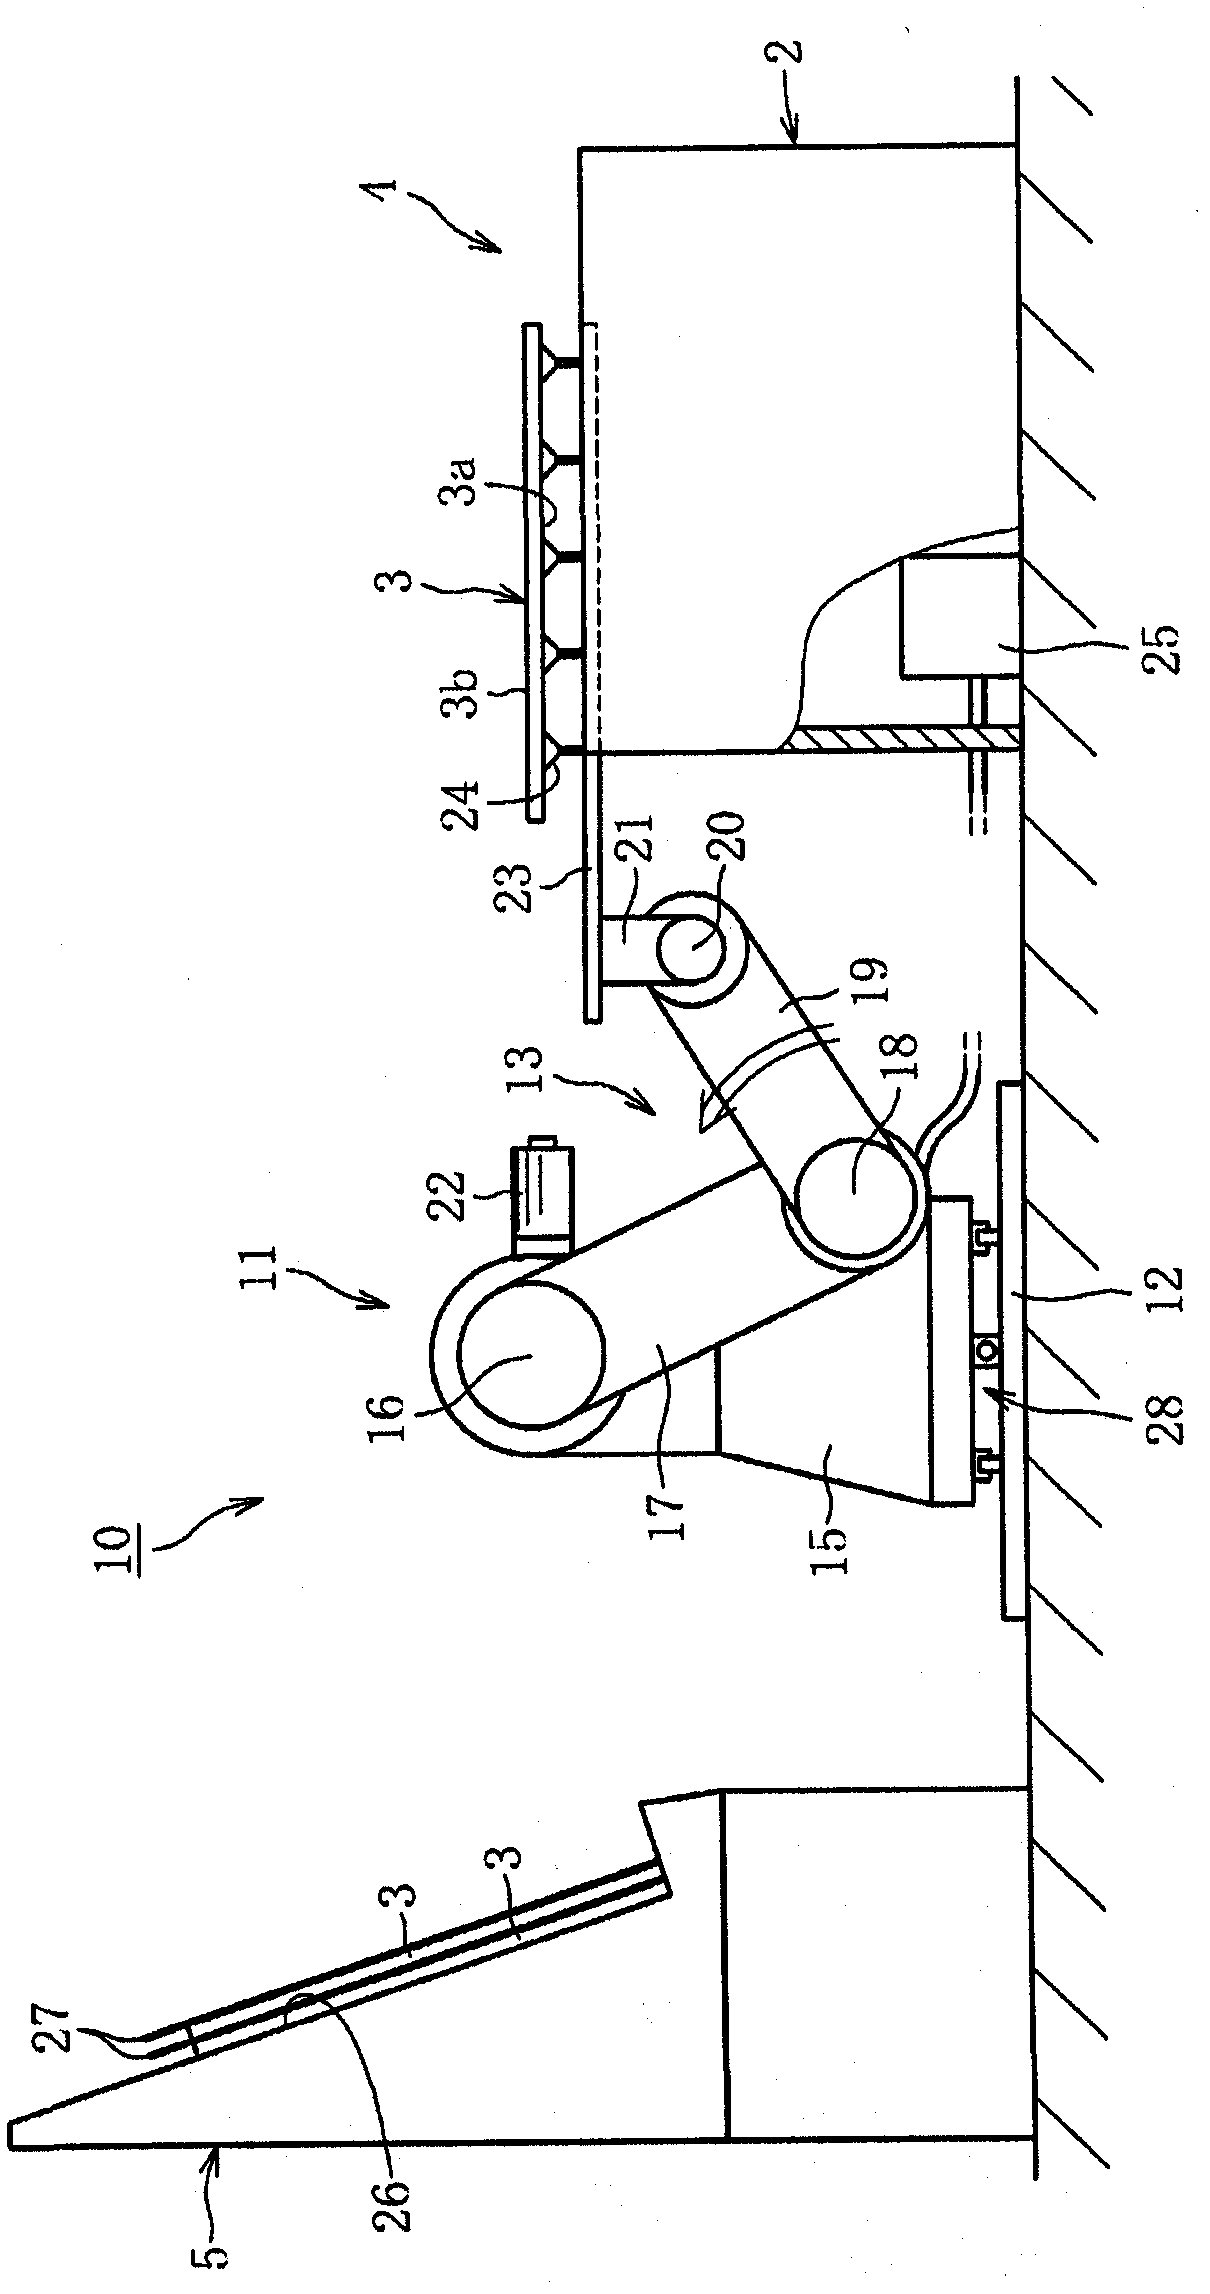 Apparatus and method for transferring board-like work